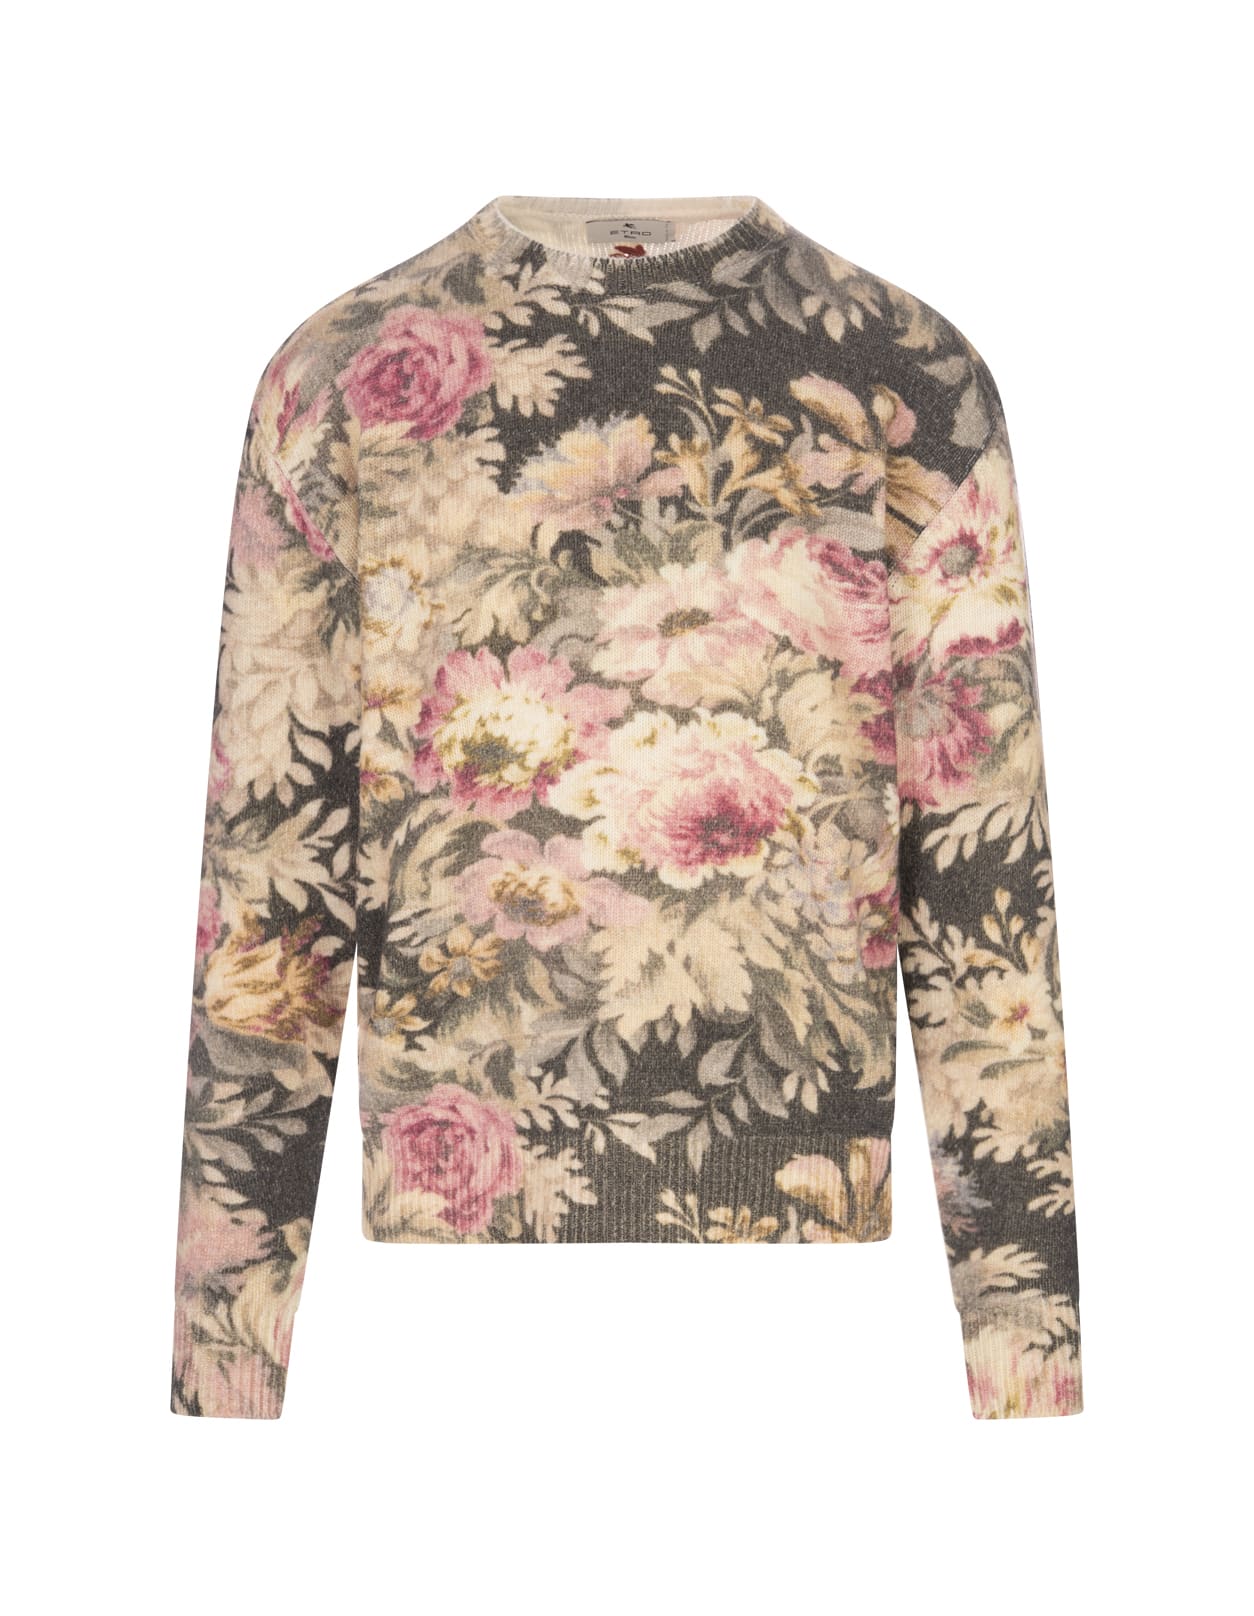 ETRO GREEN FOLIAGE FLORAL SWEATER